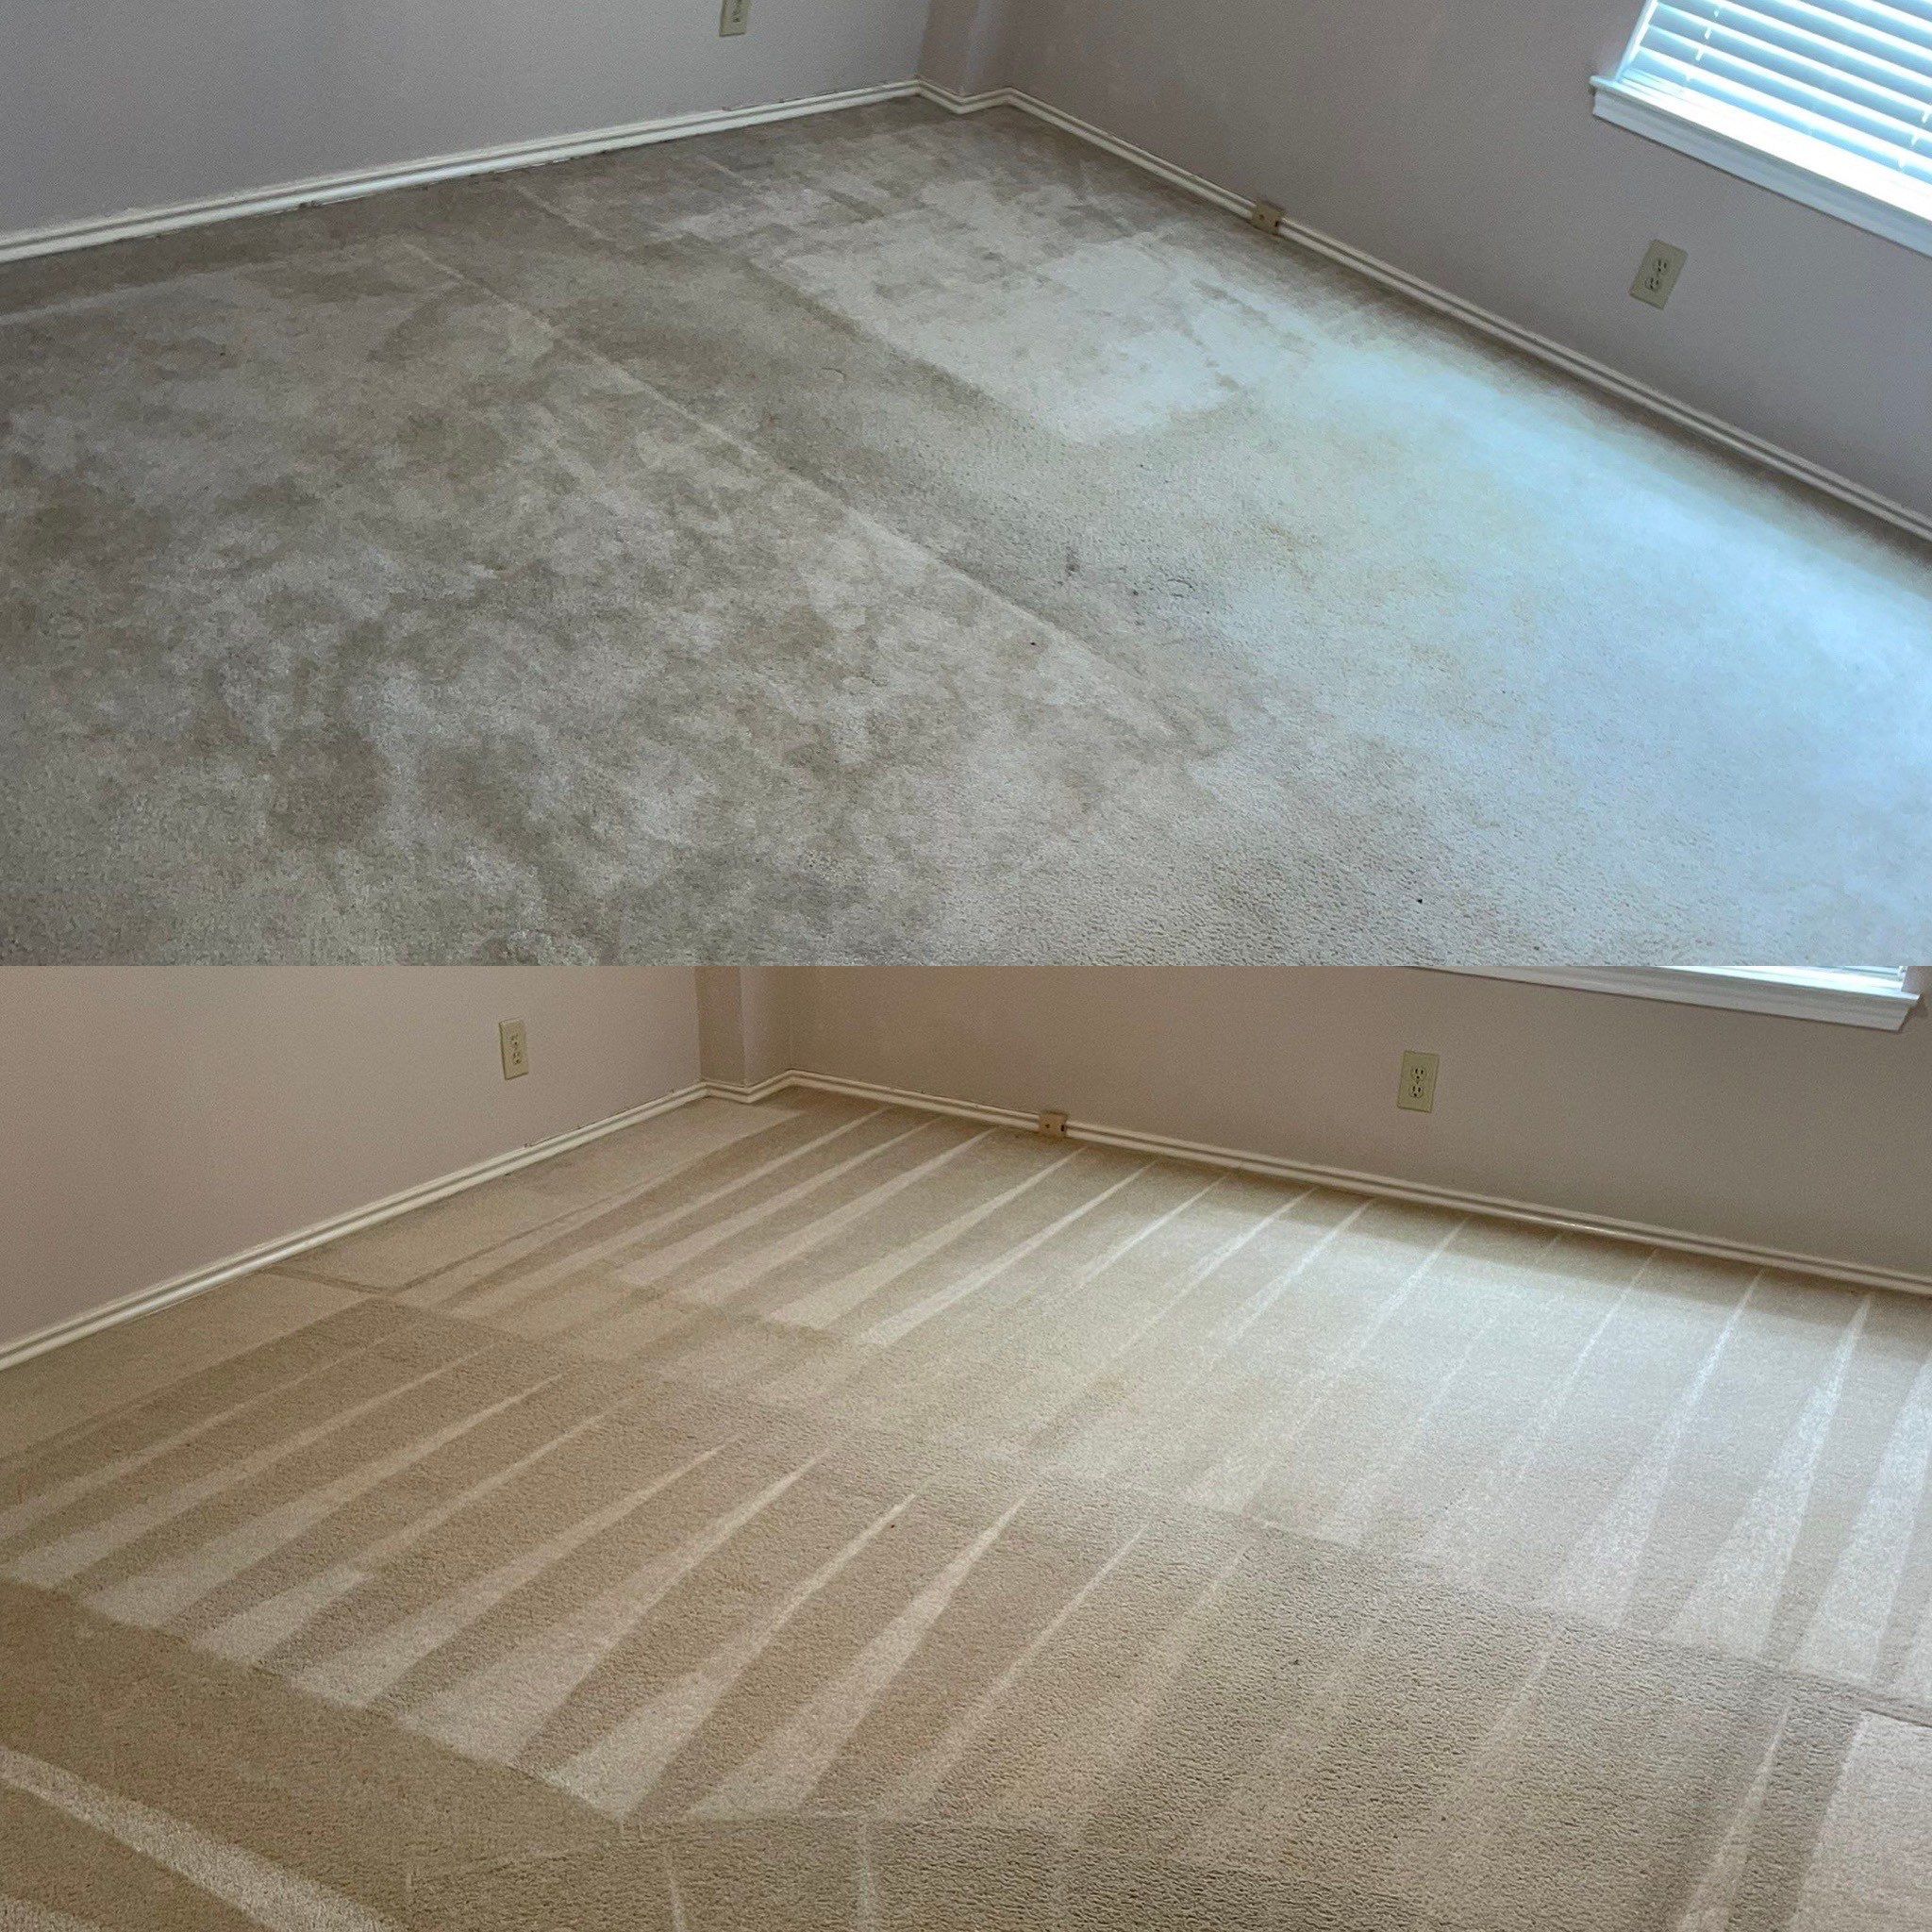 the image shows a before and after scenario of carpet cleaning service the top photo displays a heavily soiled and stained carpet with visible dirt and dark patches indicating high foot traffic or spillage areas the bottom photo shows the same carpet after a thorough cleaning the carpet appears much cleaner with a revitalized appearance showcasing uniform color and texture clean lines from the cleaning process are also visible suggesting the use of a steam cleaner or similar device for deep cleaning the carpet fibers the transformation indicates the removal of dirt stains and possibly odors achieving a refreshed and maintained look for the carpet the carpet cleaning service likely involved pretreatment of stains steam cleaning with a hot water extraction method and possibly deodorizing treatments to ensure a complete renewal of the carpet surface